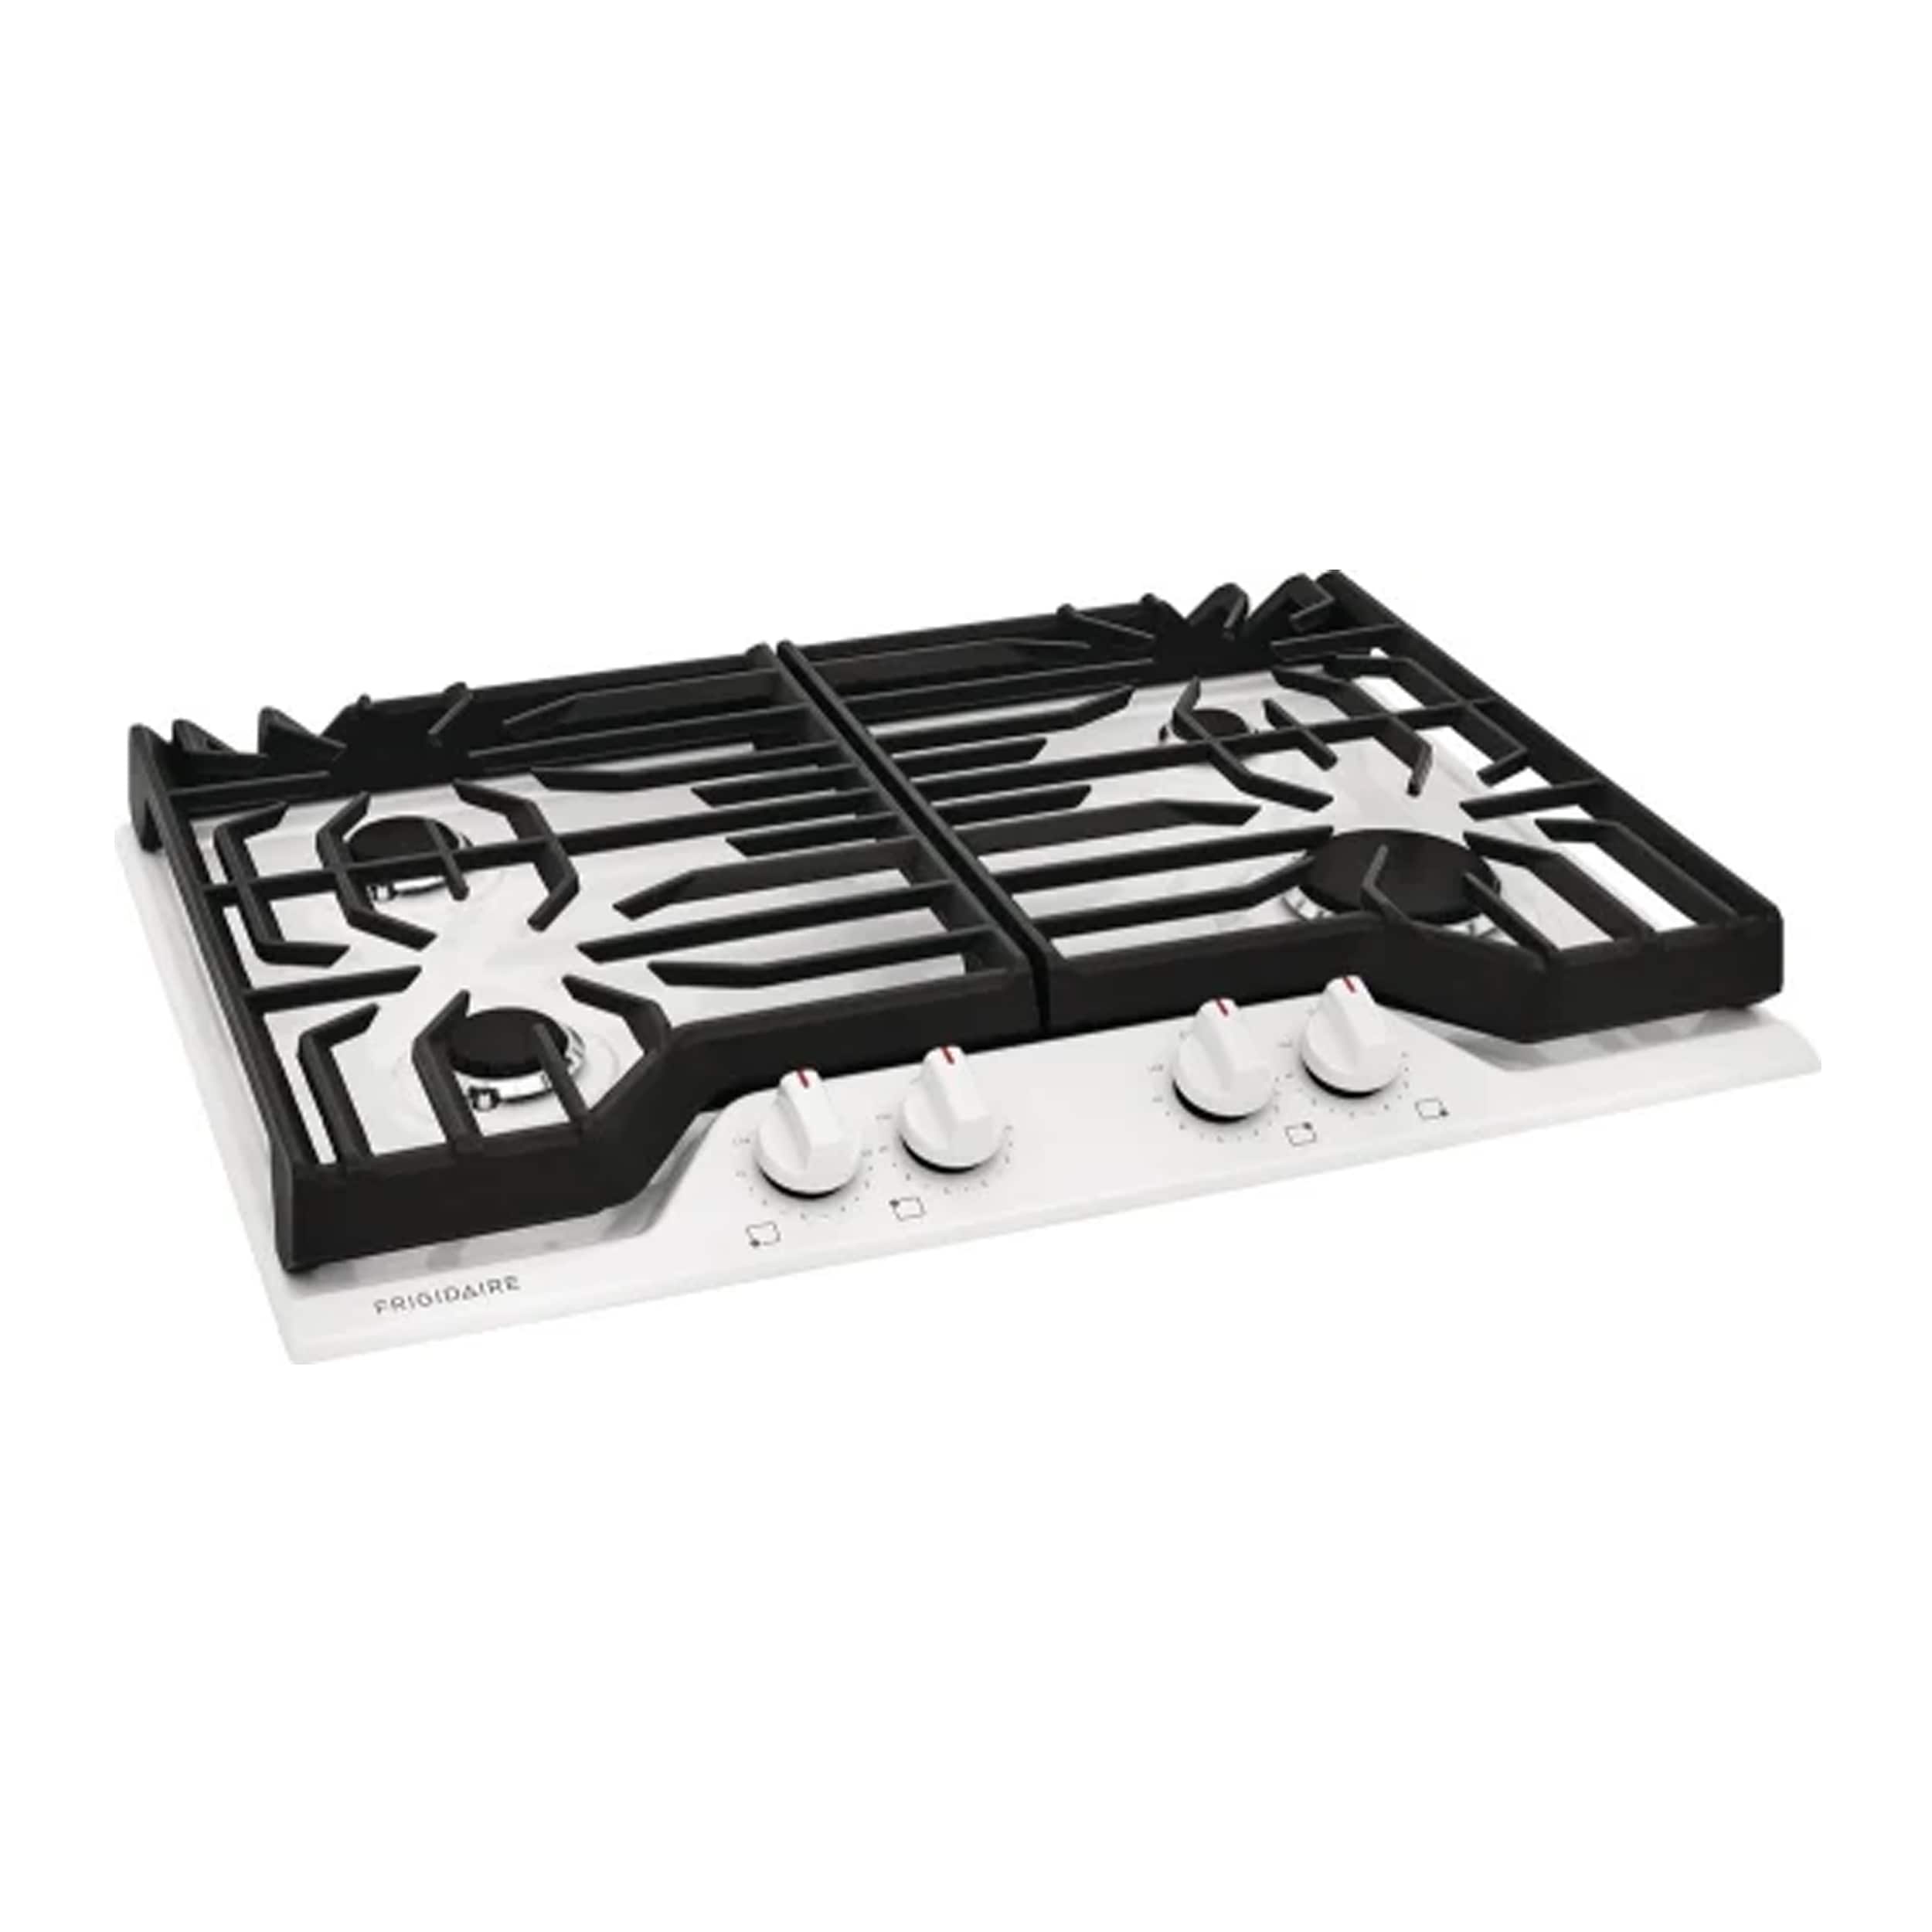 Frigidaire 30IN GAS COOKTOP - MODEL FCCG3027AW